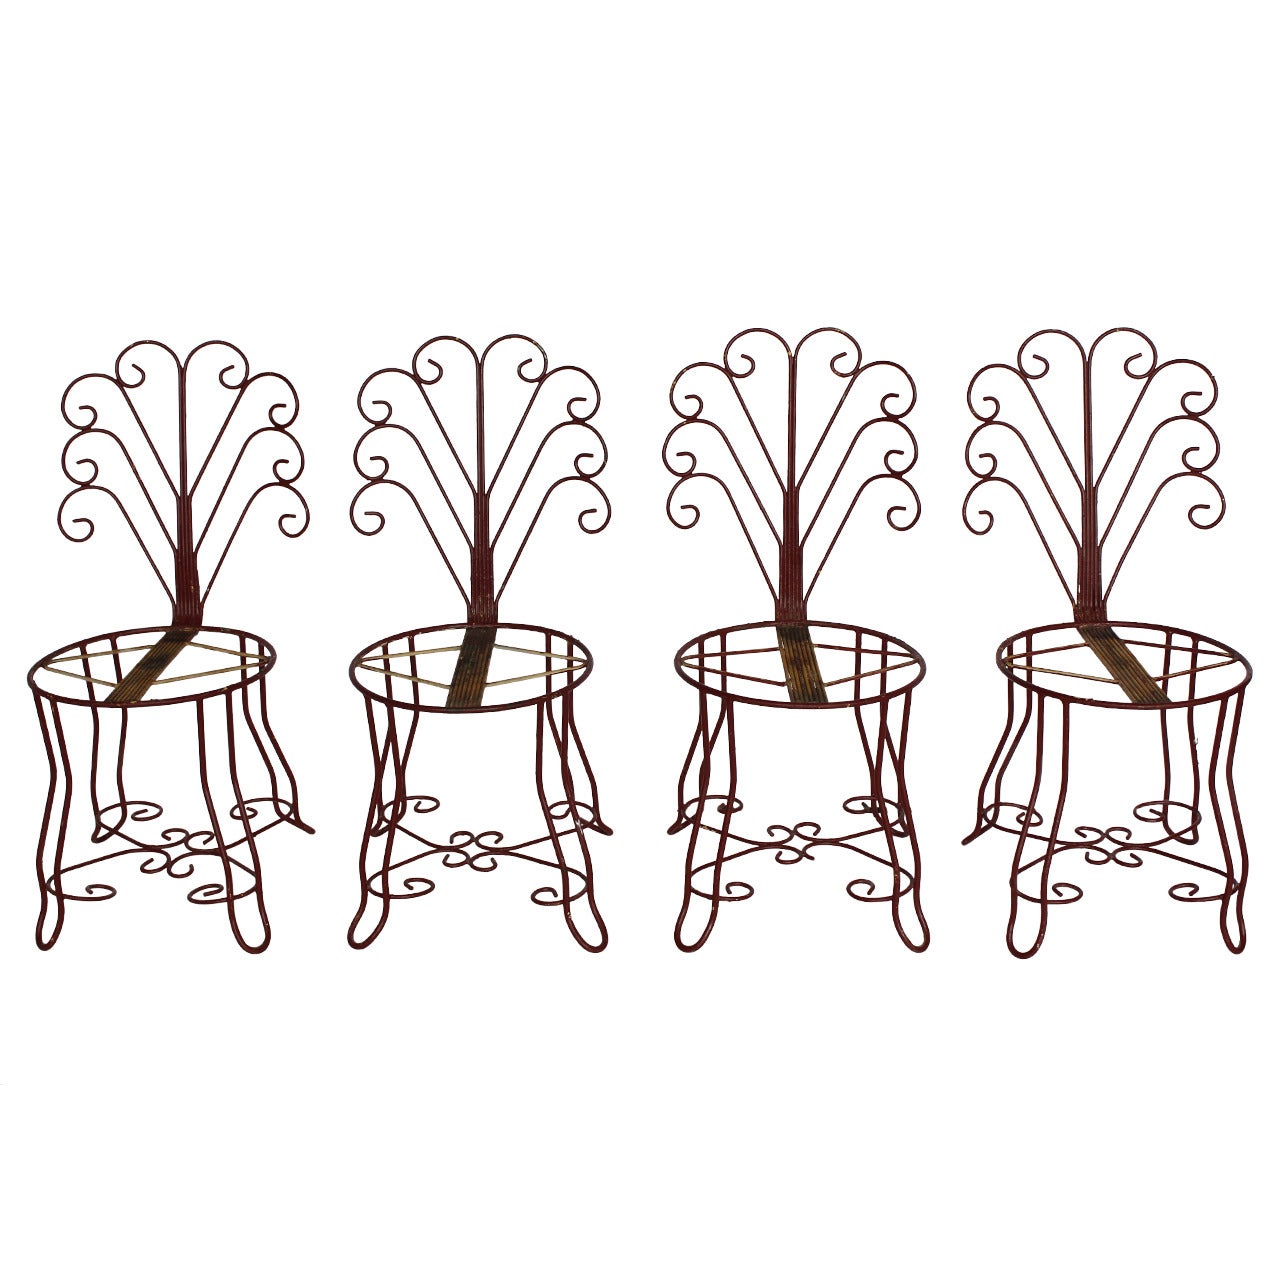 1930s French Iron Garden Chairs For Sale